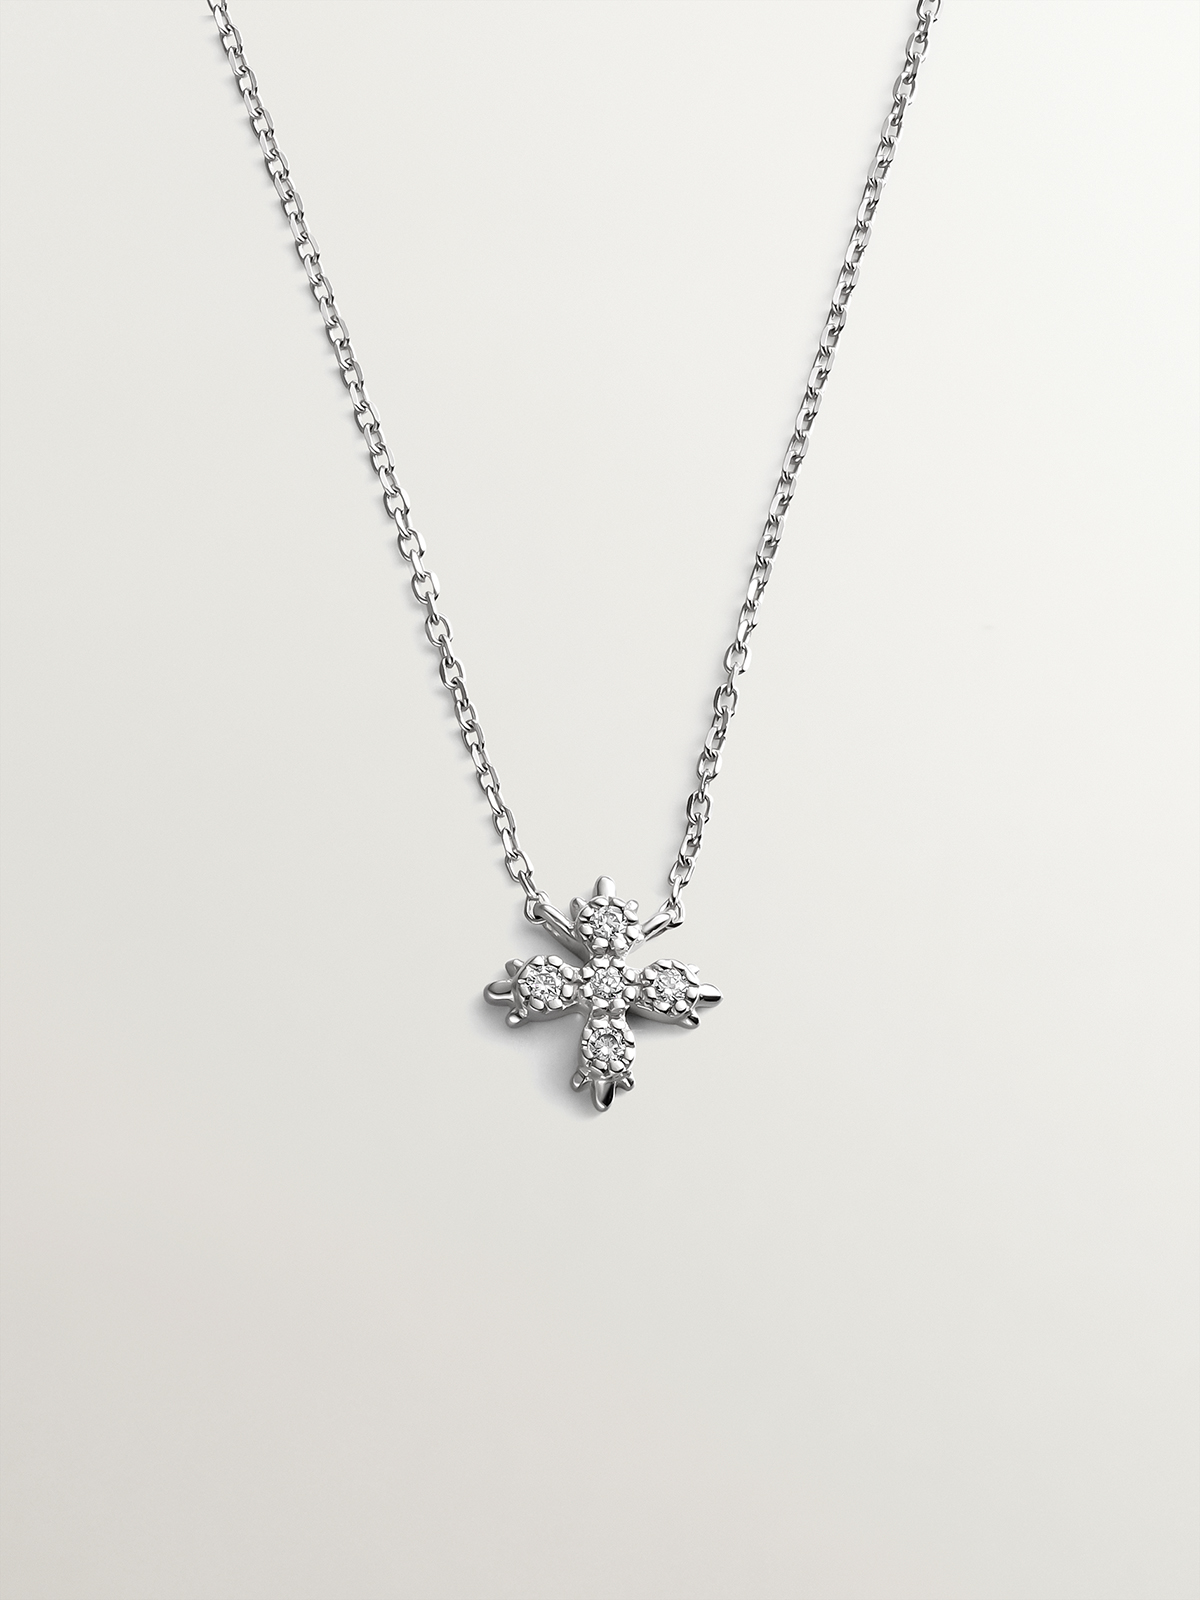 18K white gold pendant with cross featuring white diamonds.